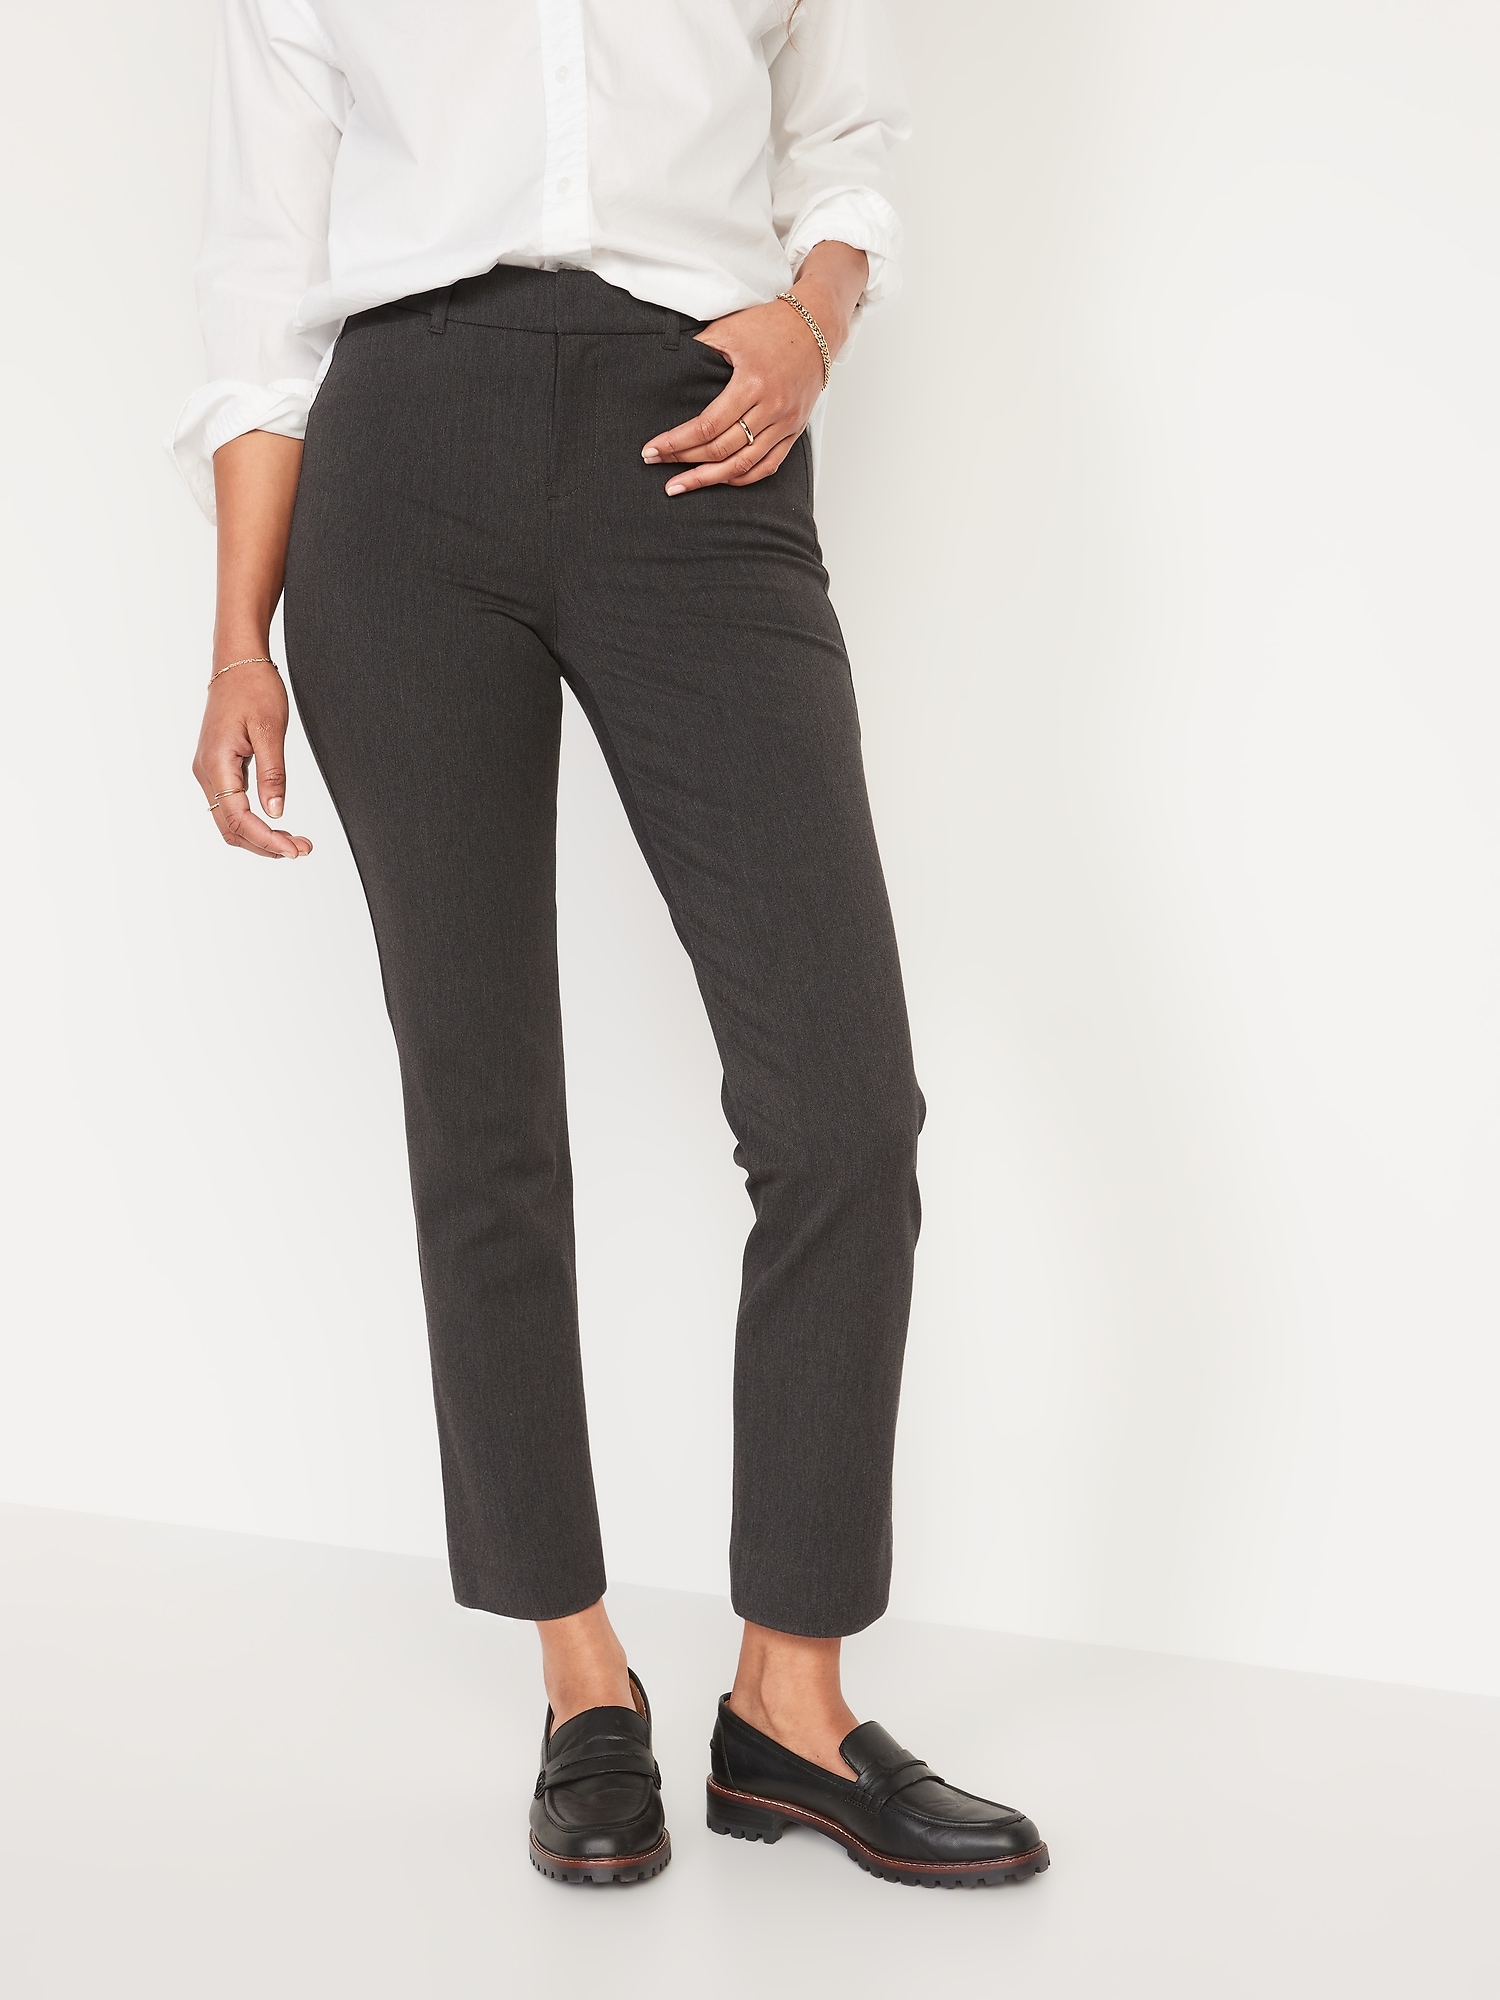 High-Waisted Pixie Straight Ankle Pants Hot Deal